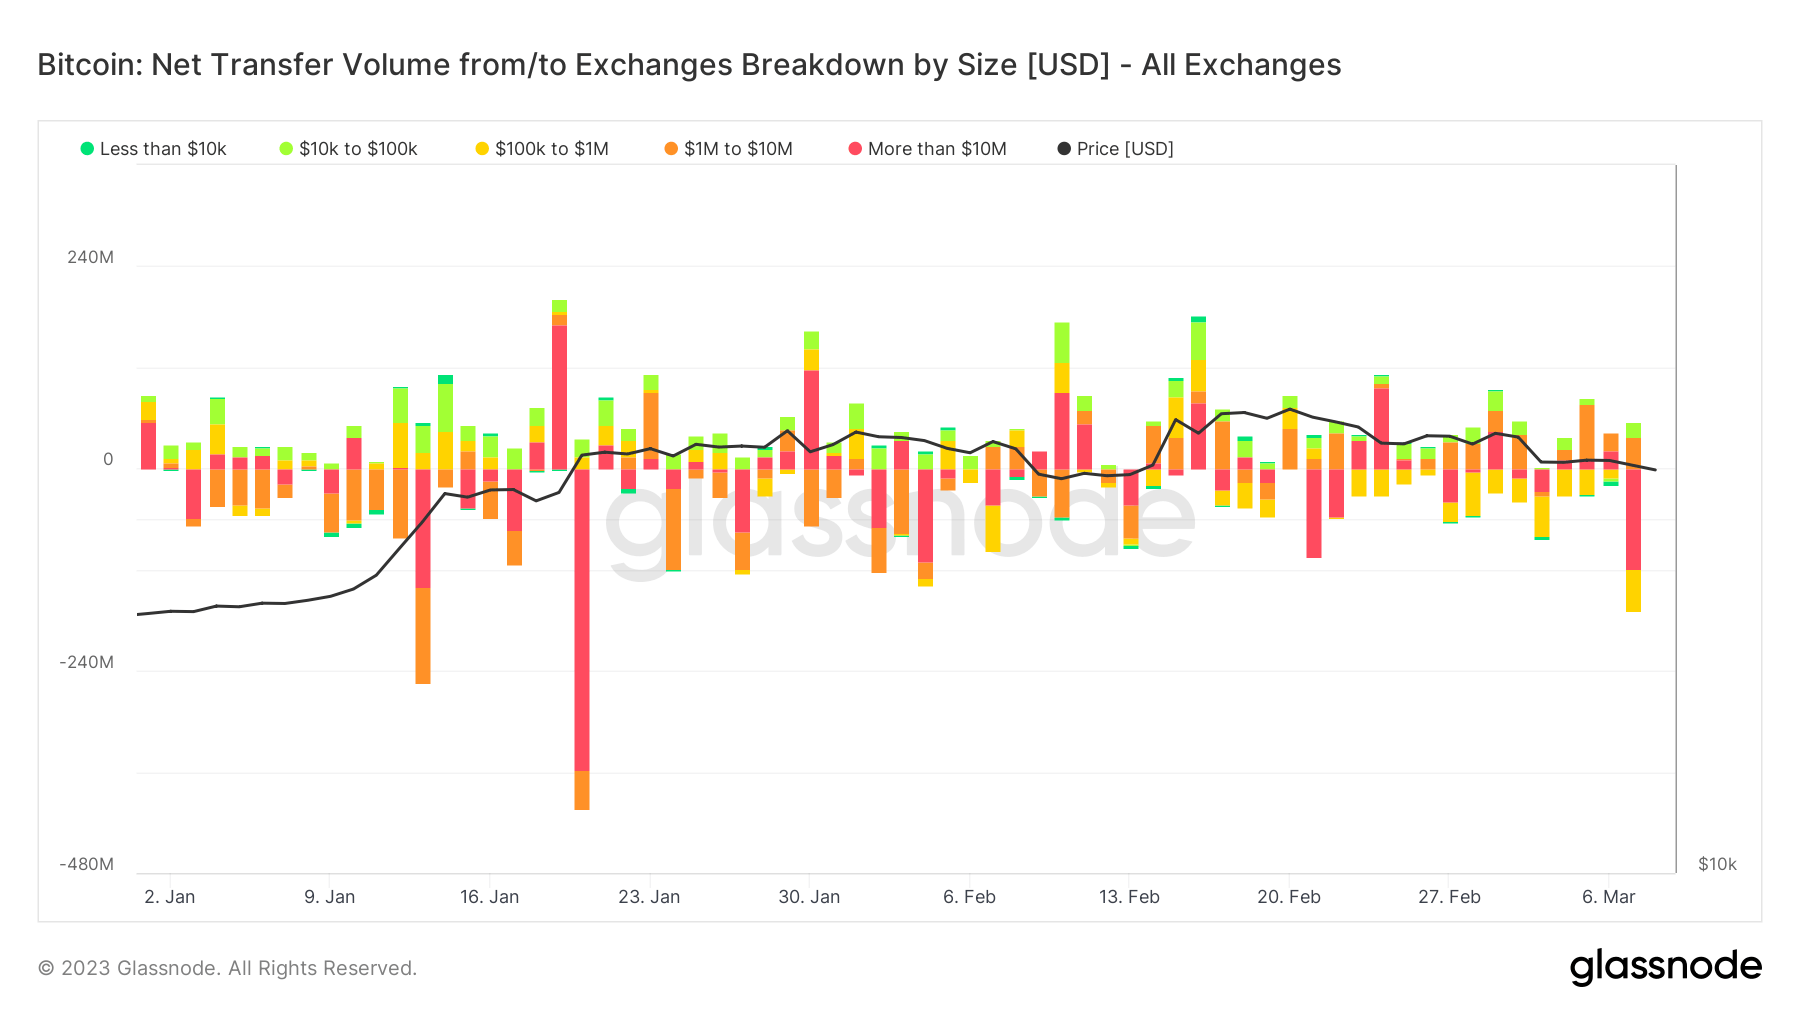 Exchange Balance by Size: (Source: Glassnode)